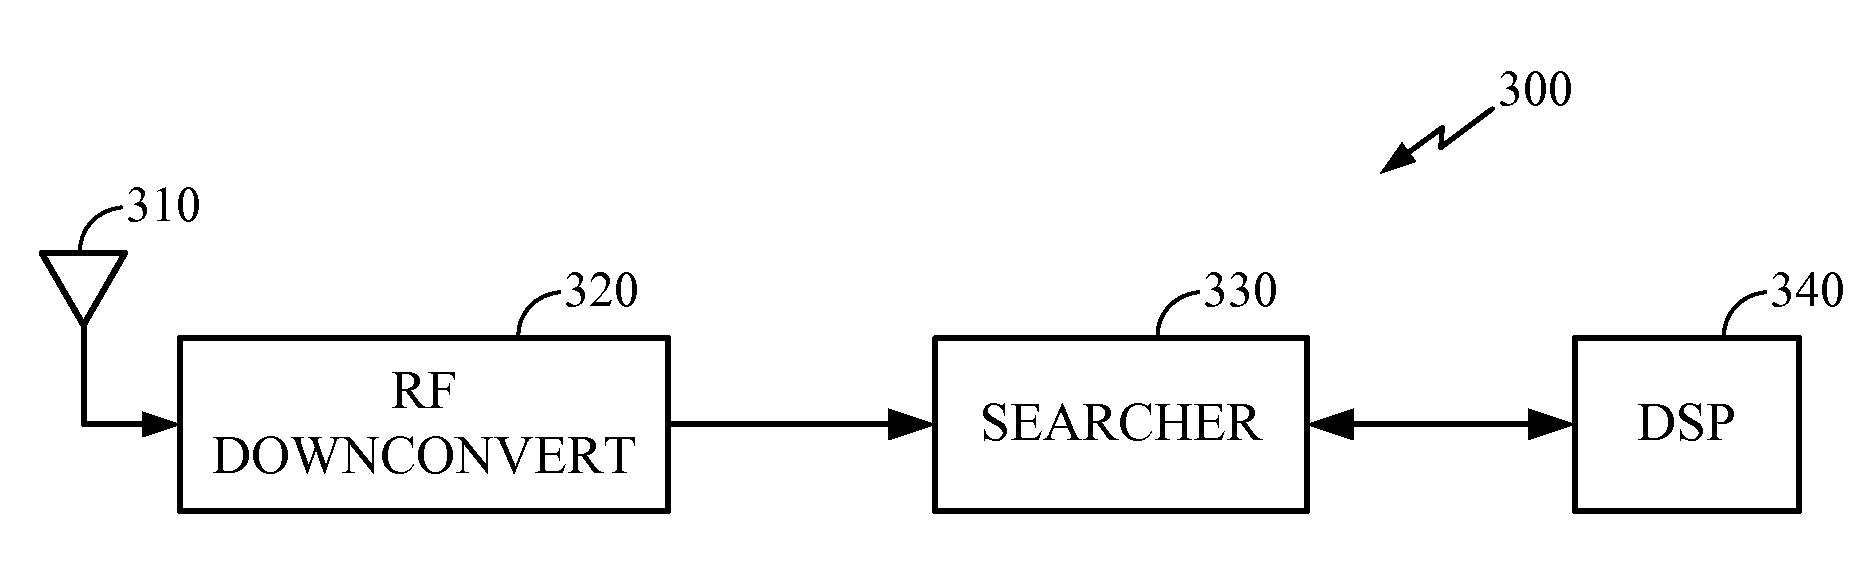 Searcher for multiple orthogonal channels with known data wcdma step2 search